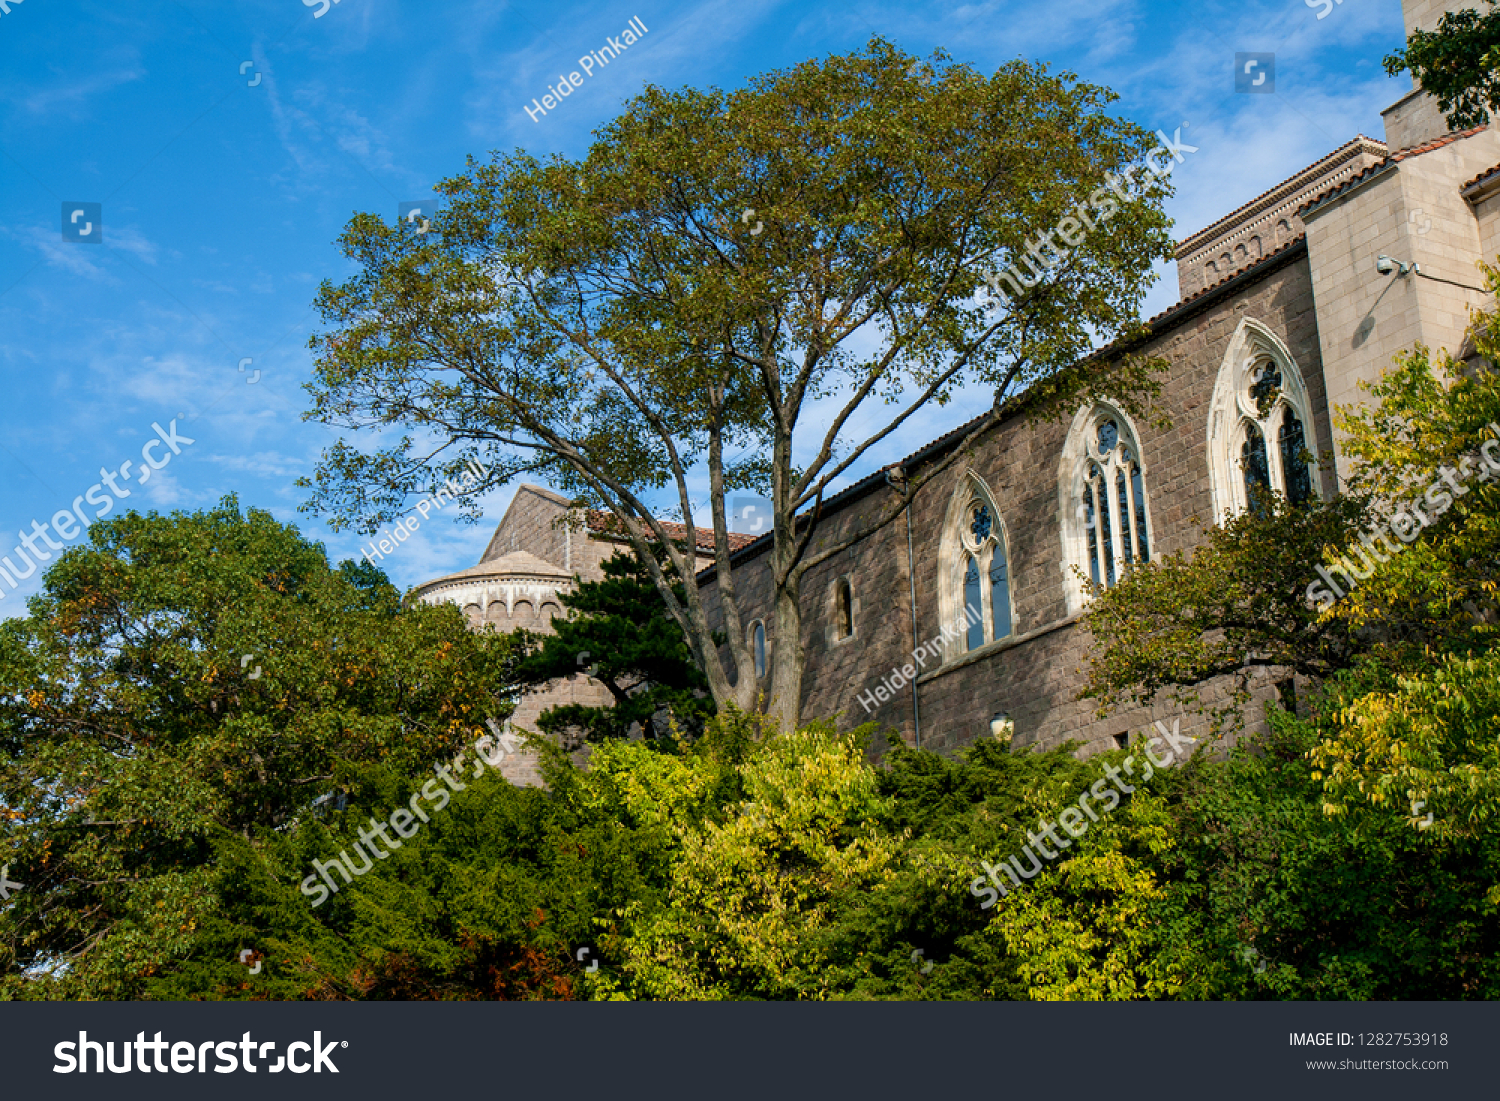 New York, USA - October 12, 2010: scenic view of a facade with gothic bows of the Cloisters in Tryon Park on a sunny day with deep blue sky and idyllic trees #1282753918